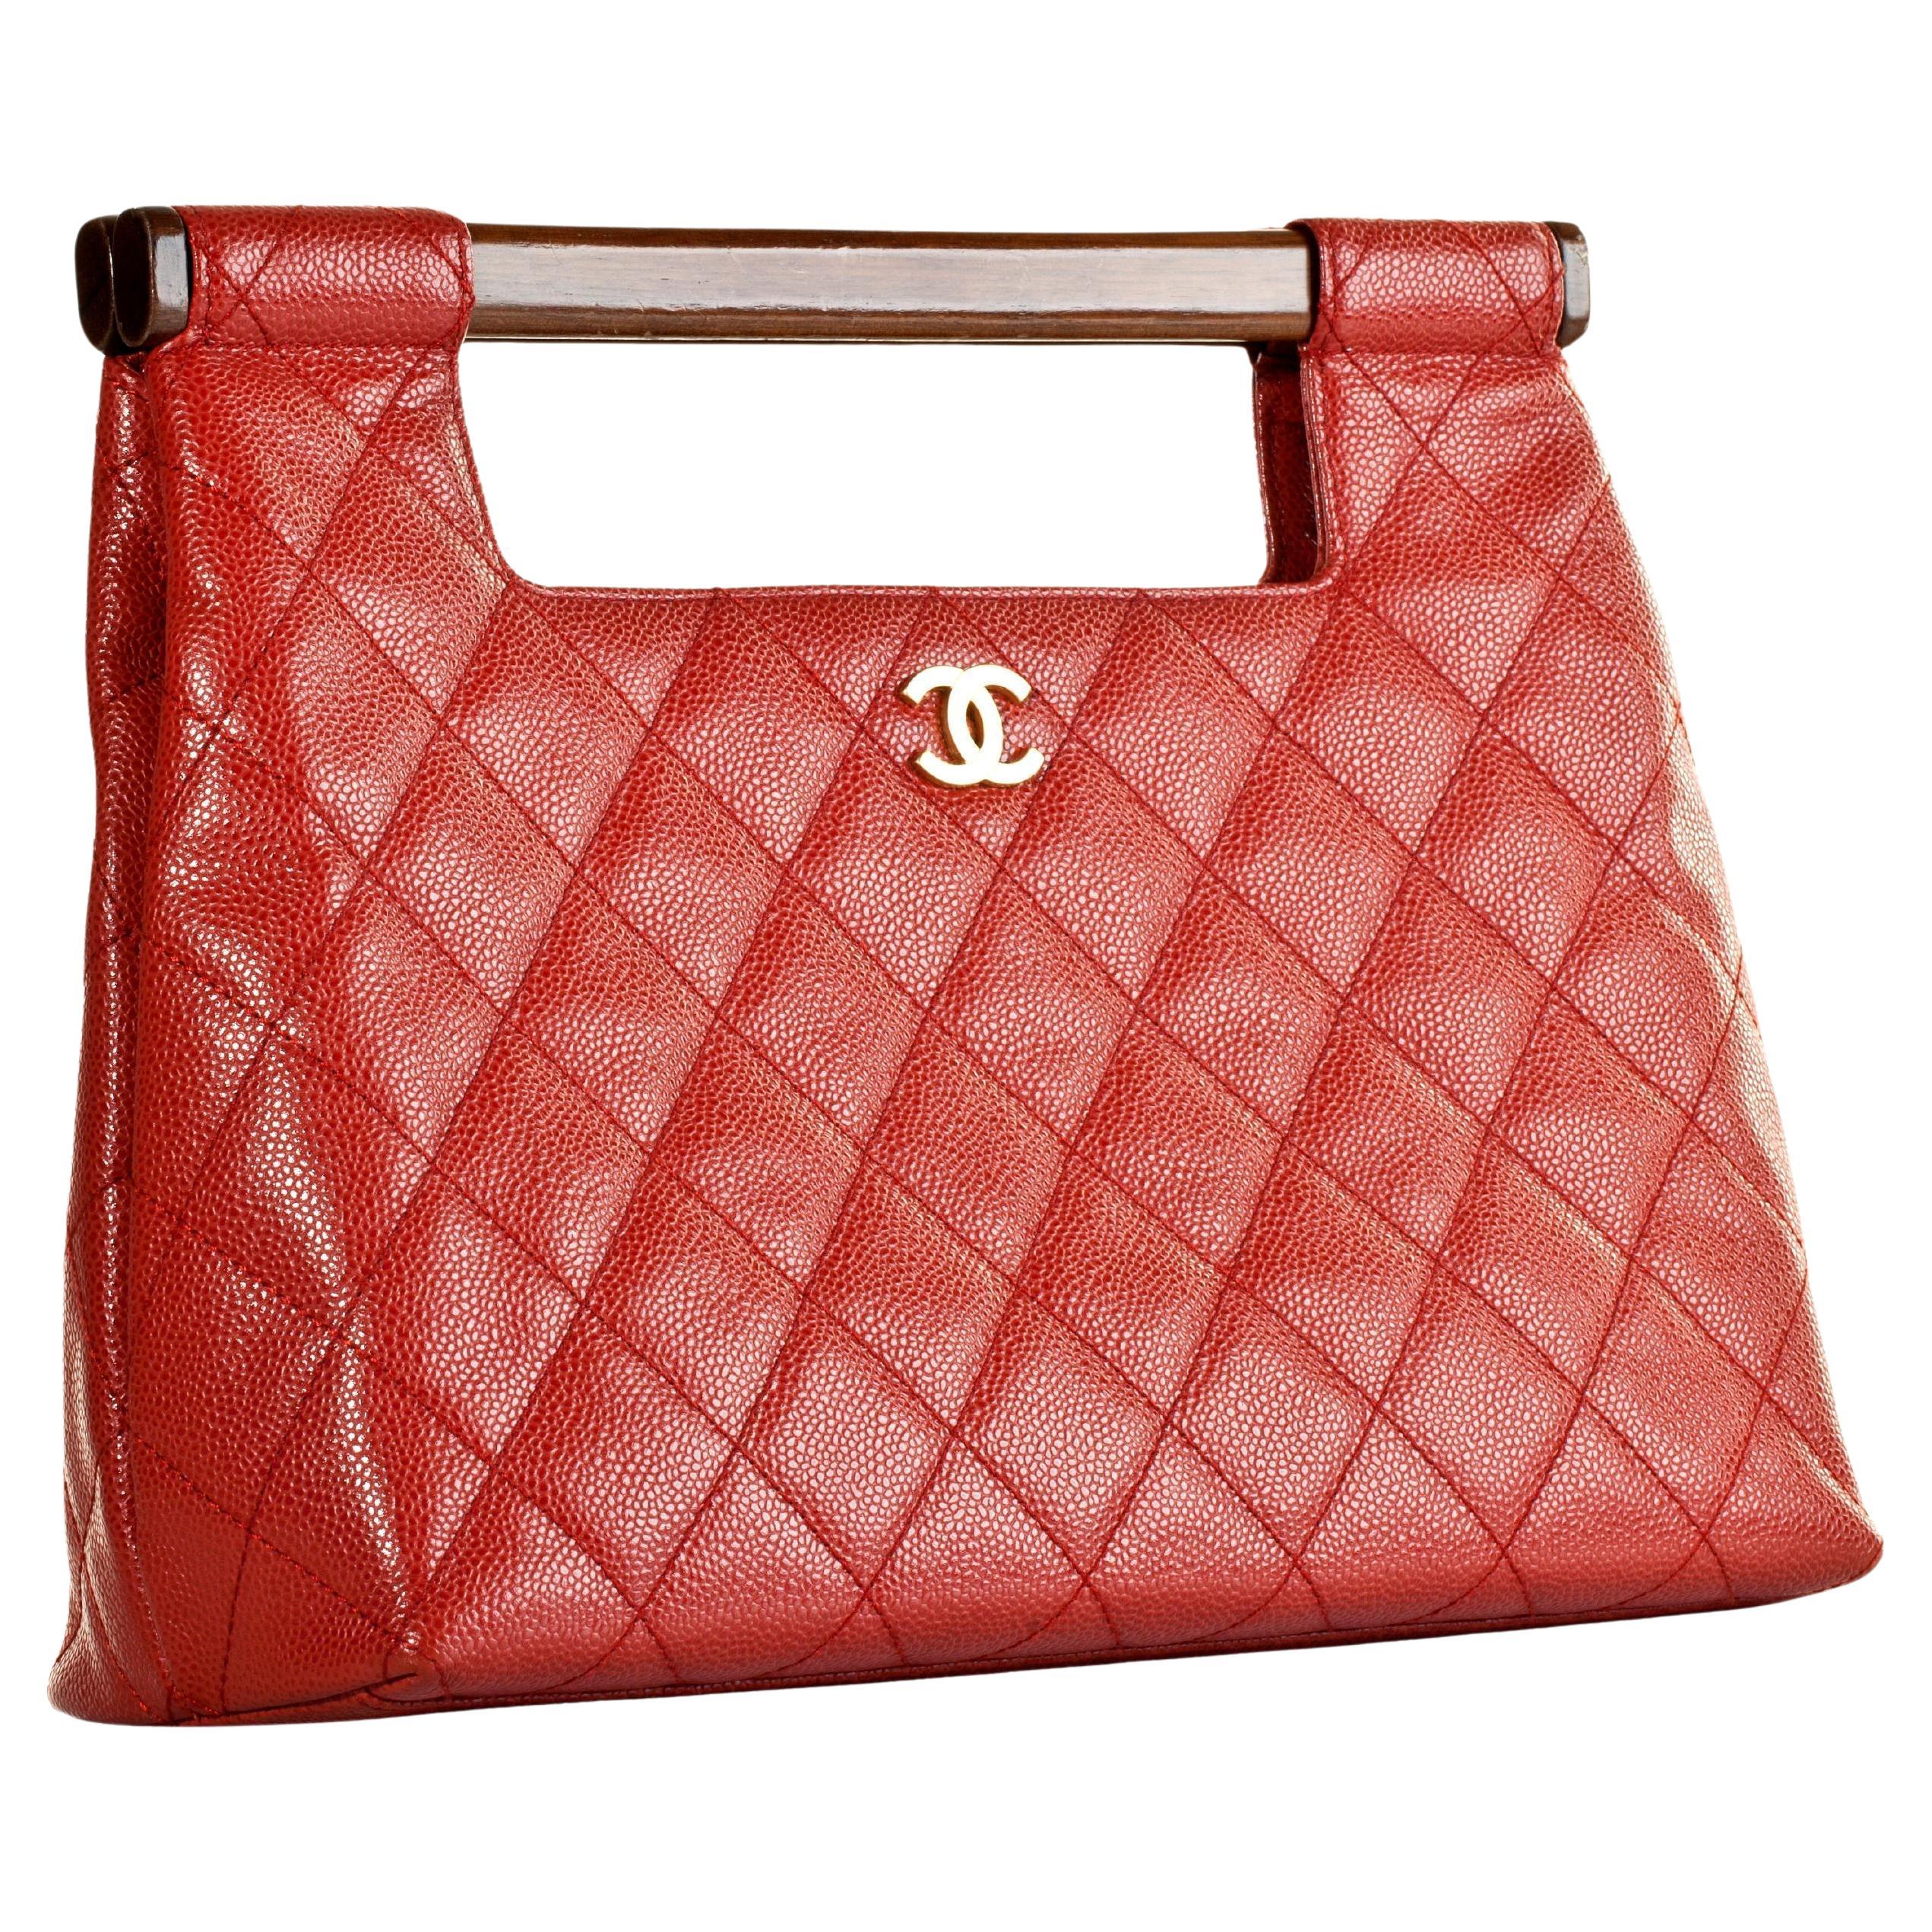 Chanel 2003 Wood Top Handle Rare Red Caviar Jumbo Kelly Envelope Clutch Tote Bag For Sale 13